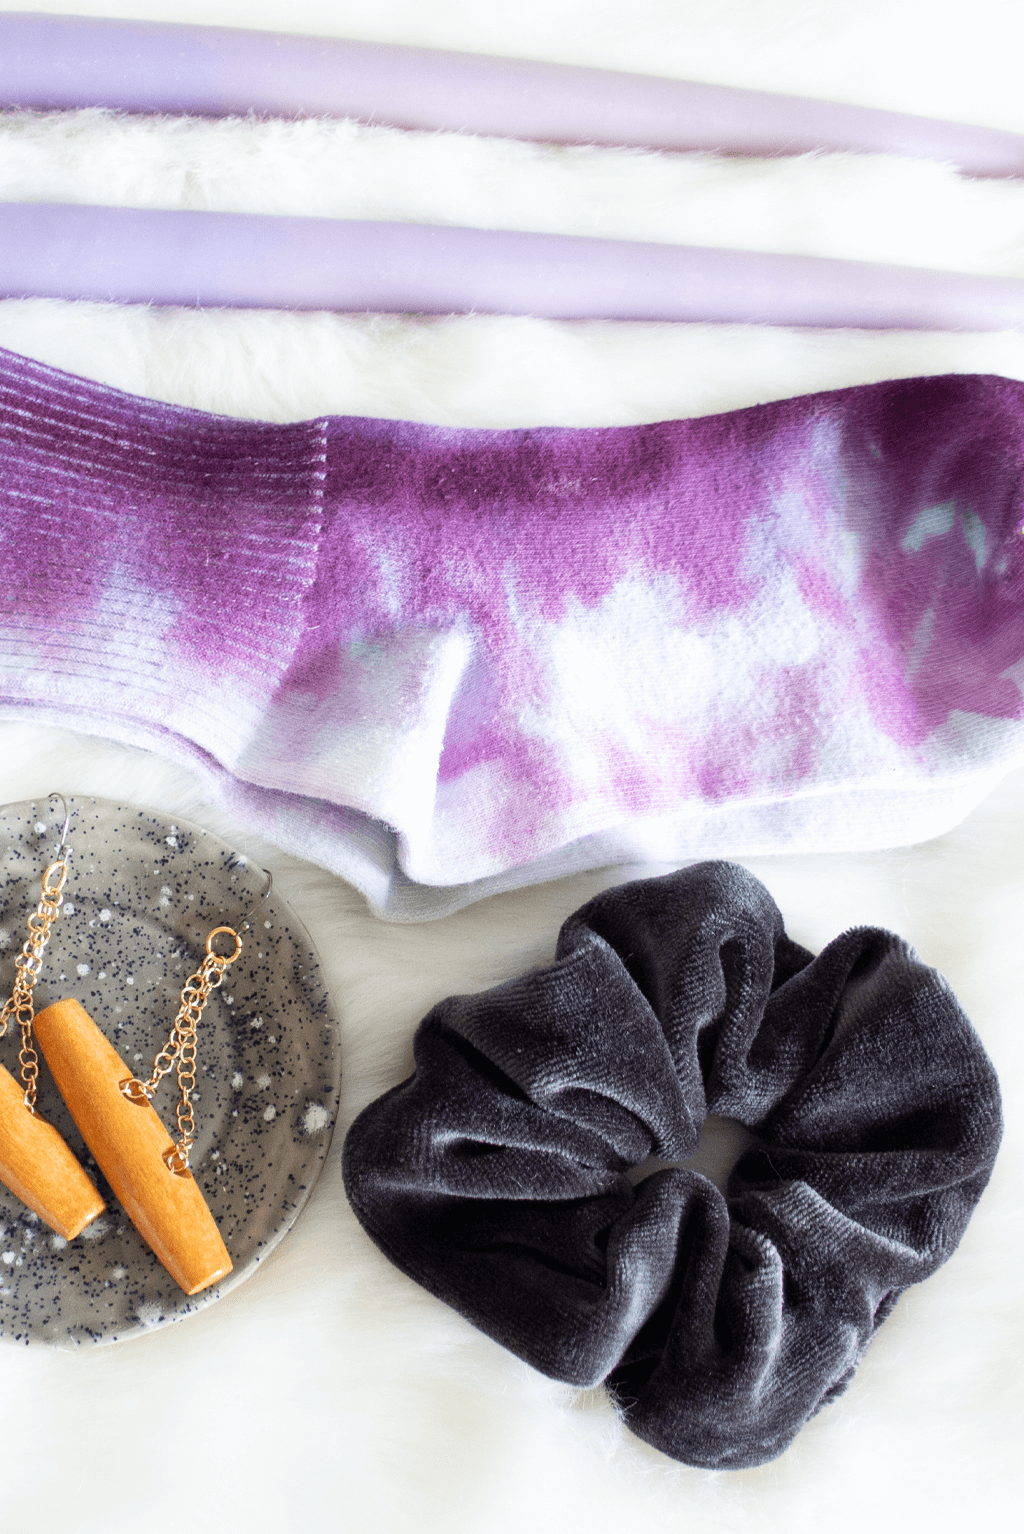 Black velvet scrunchie, purple dyed socks, wood earrings, and a pair of purple candles rest on faux fur. 